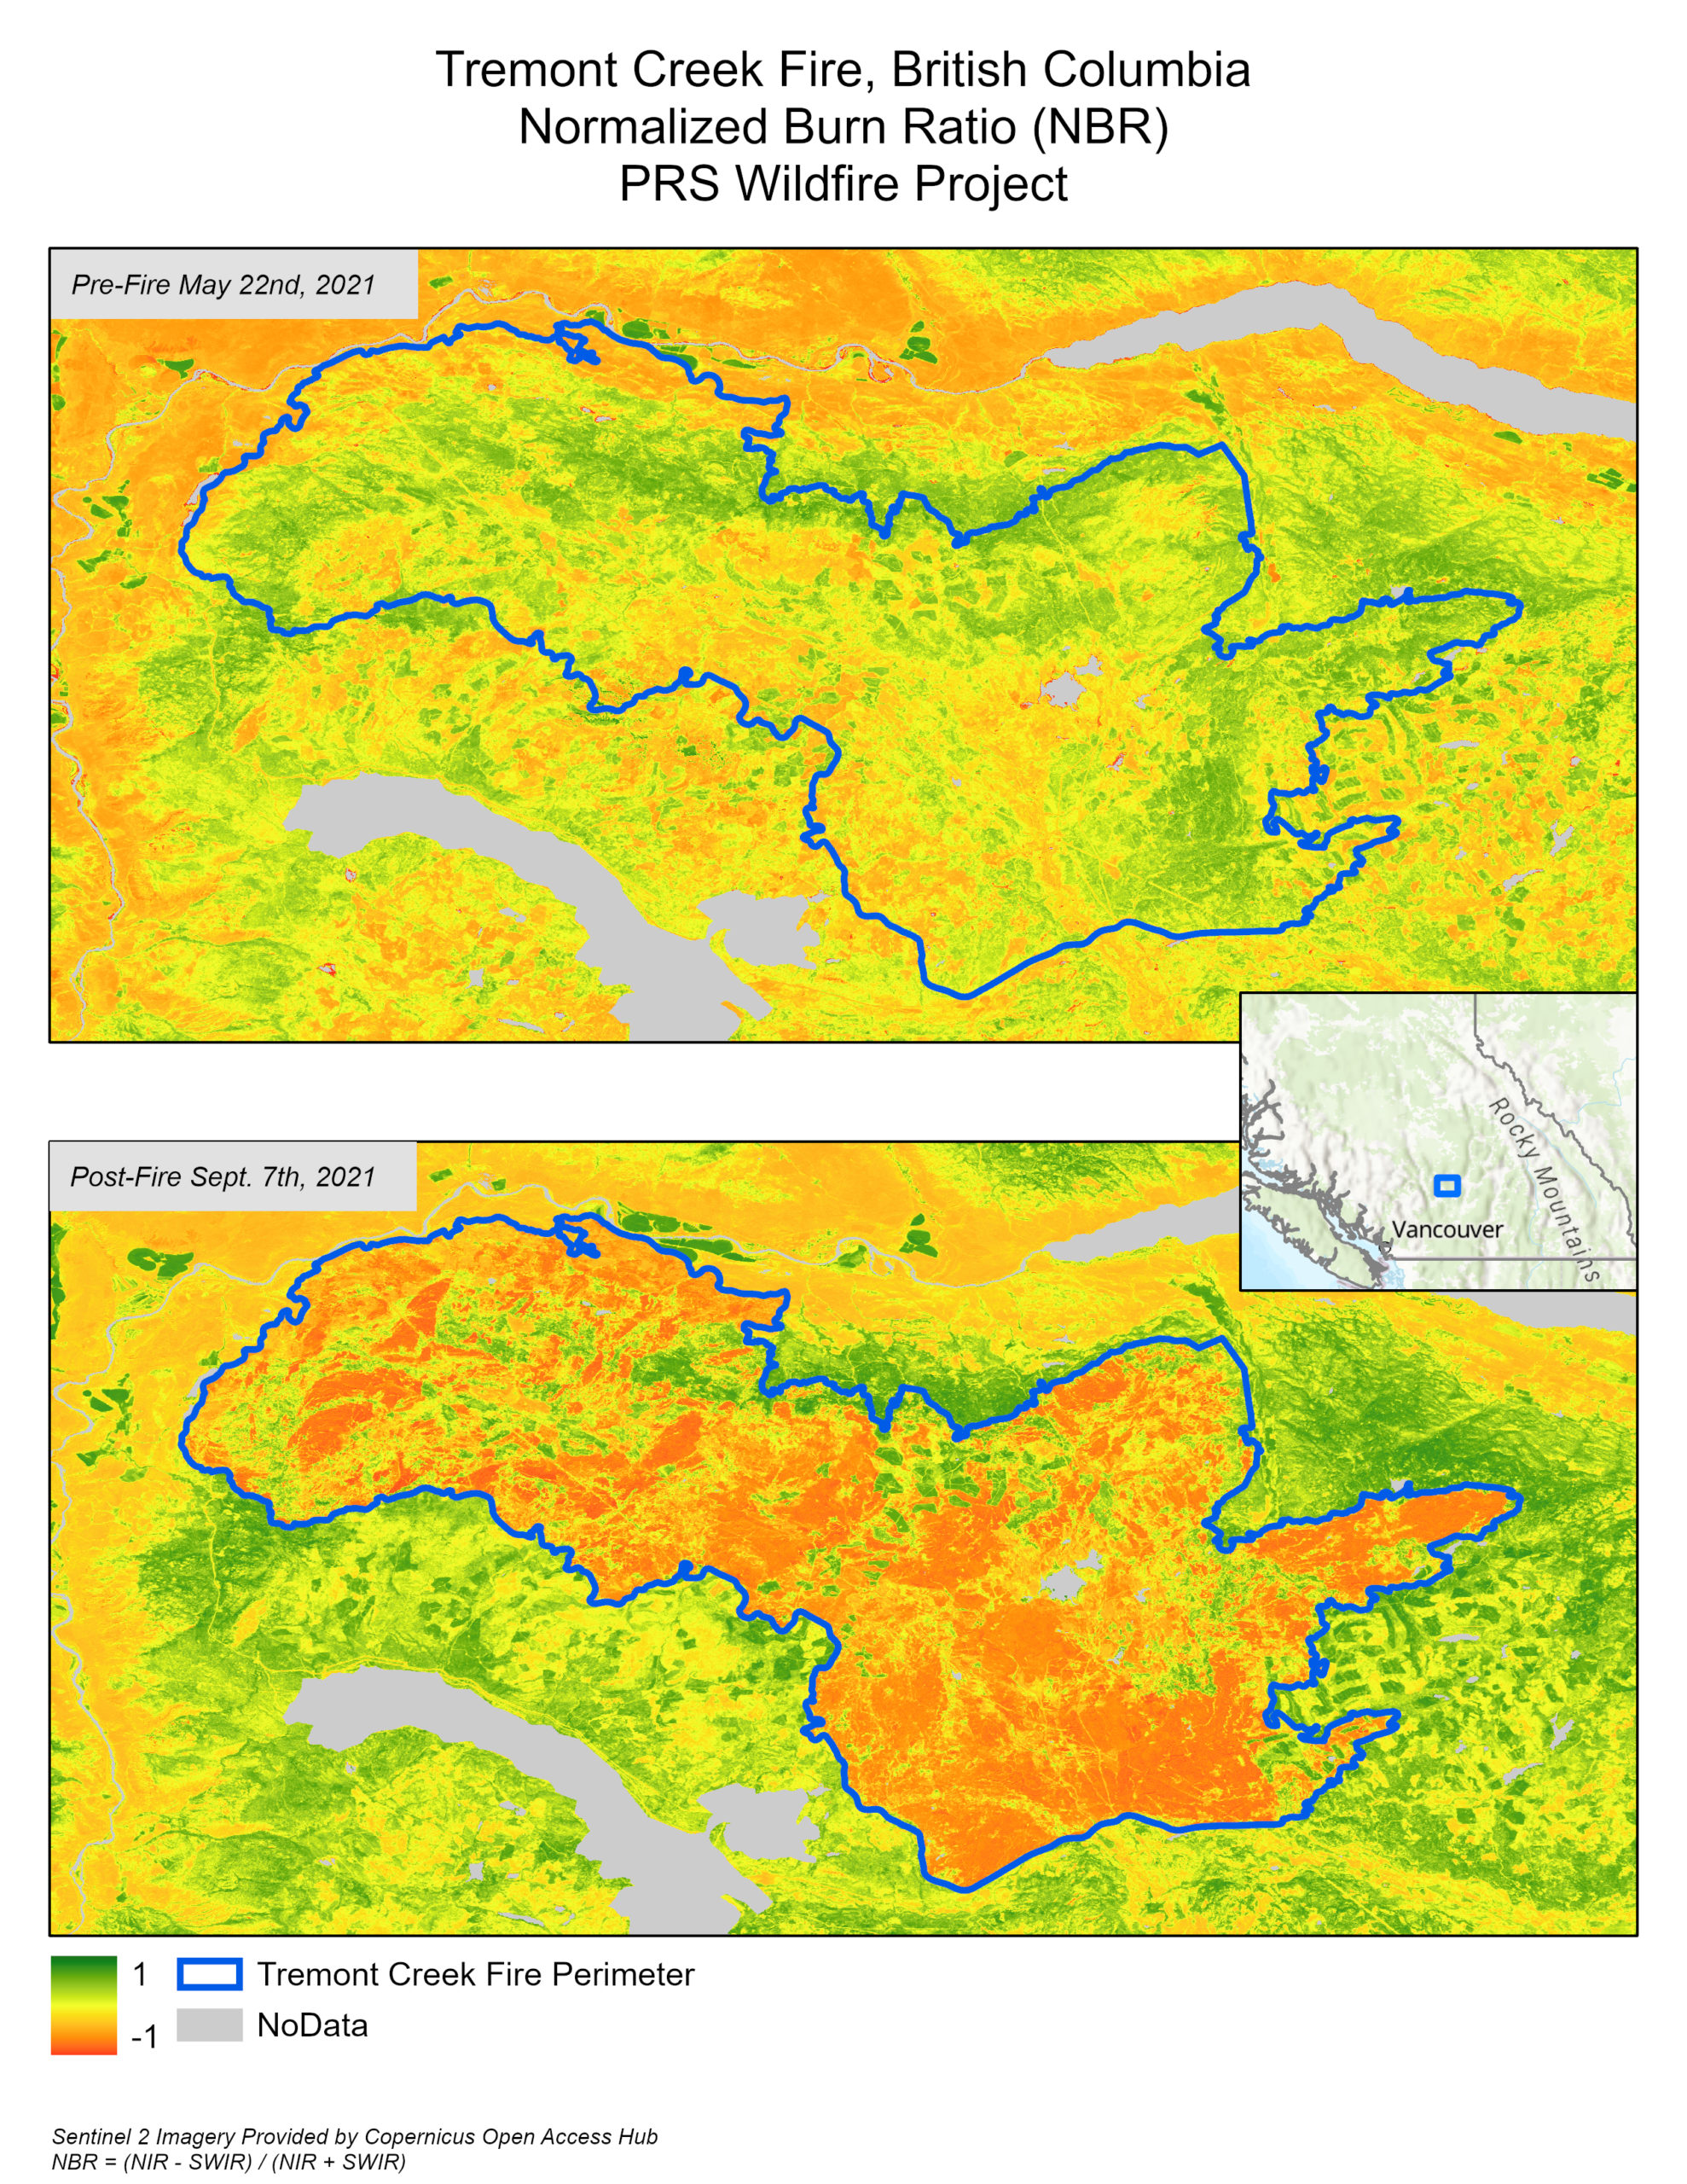 NBR raster images for the pre and post-fire images for the Treemont Creek Fire in BC in 2021